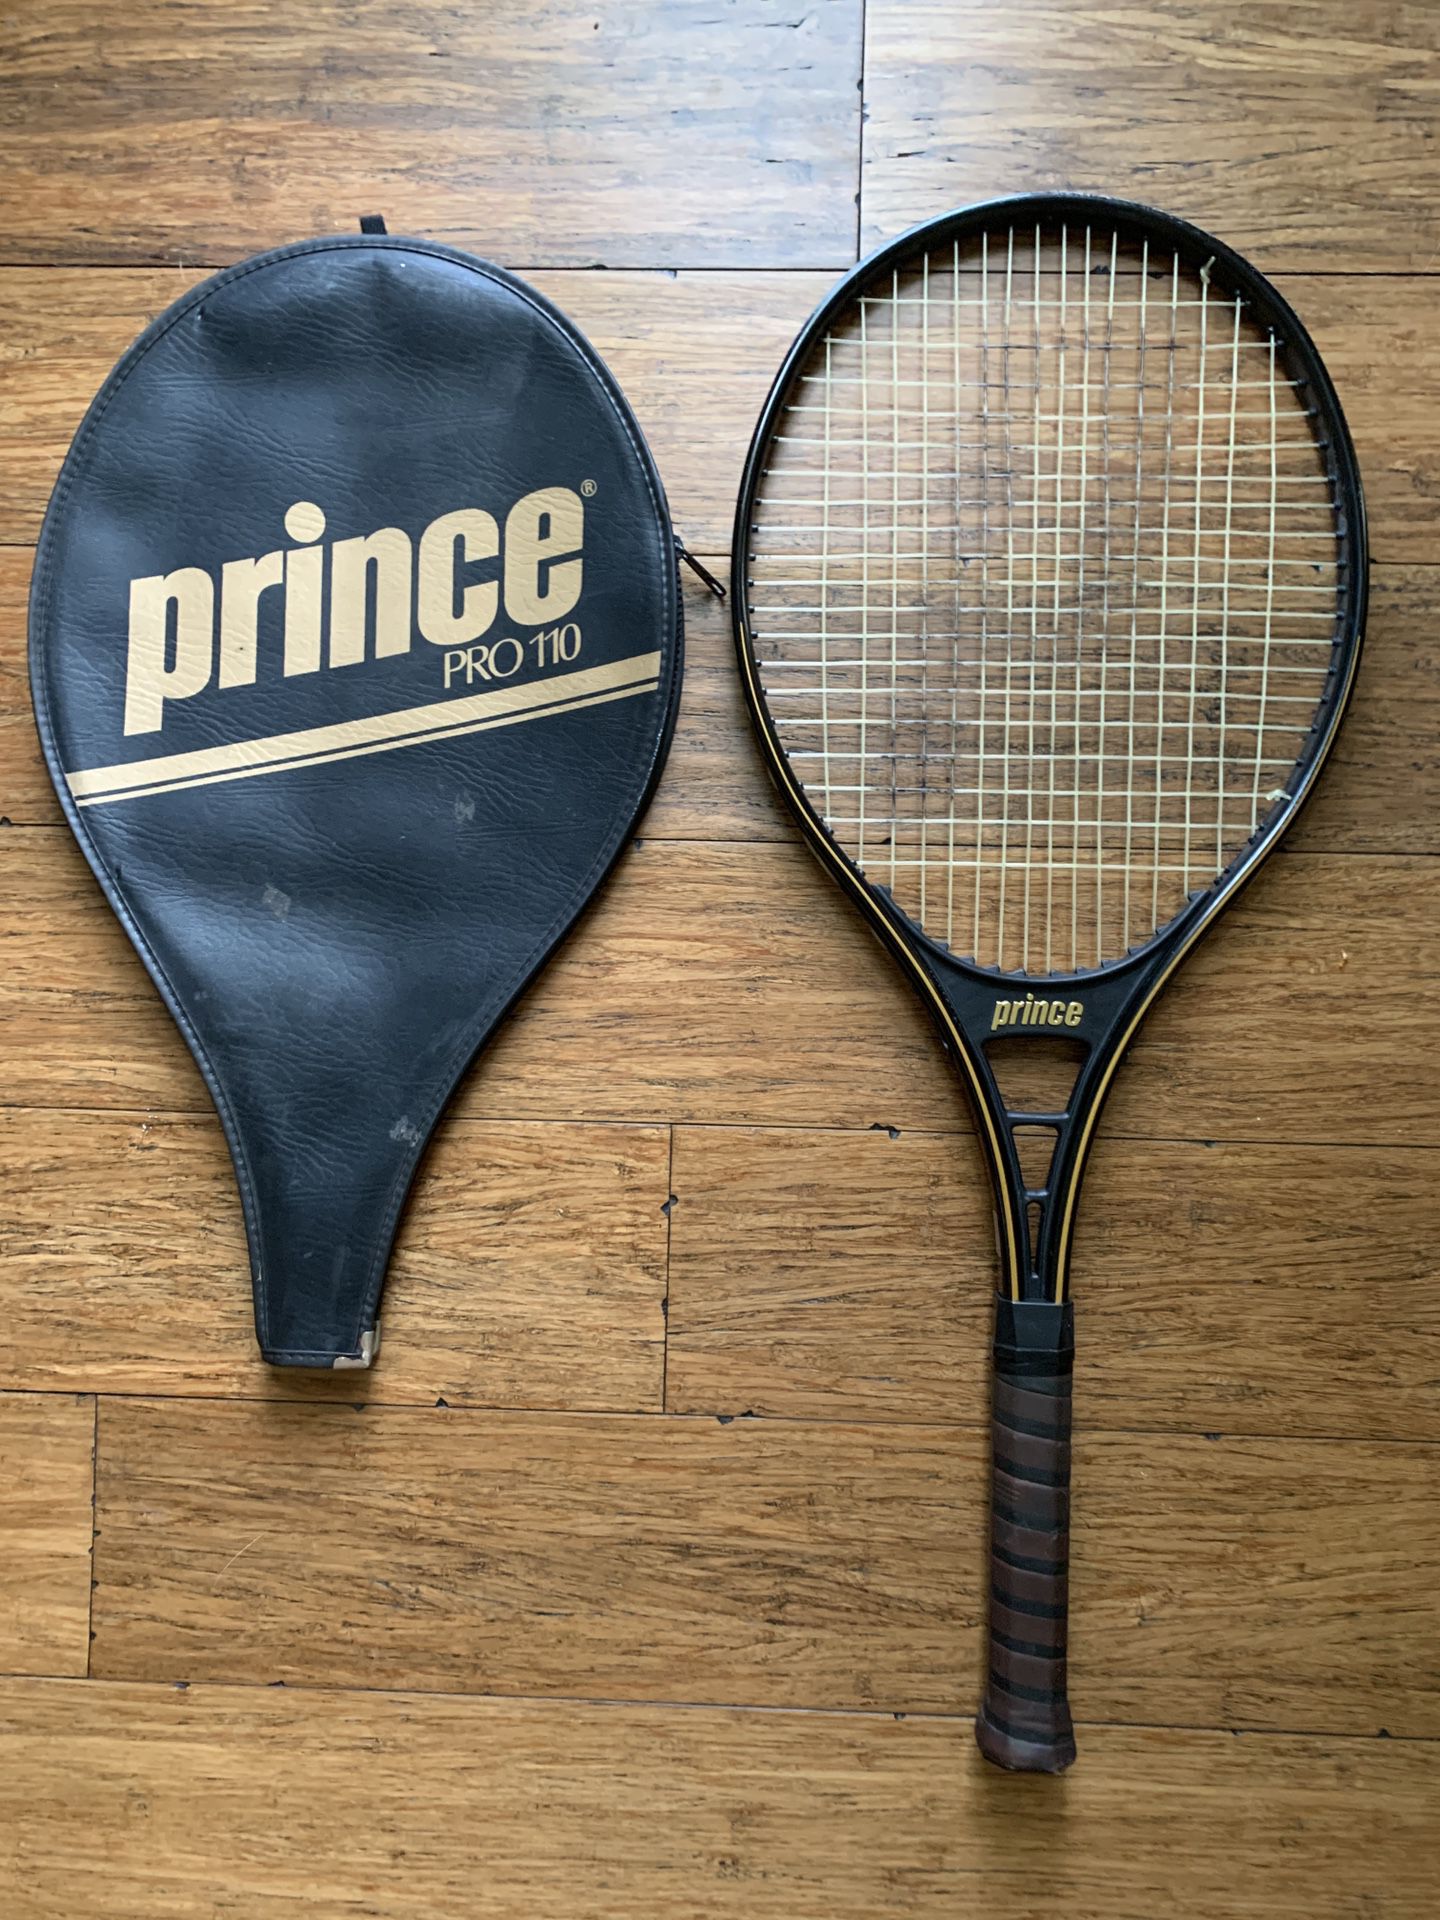 Prince pro 110 tennis racket with cover